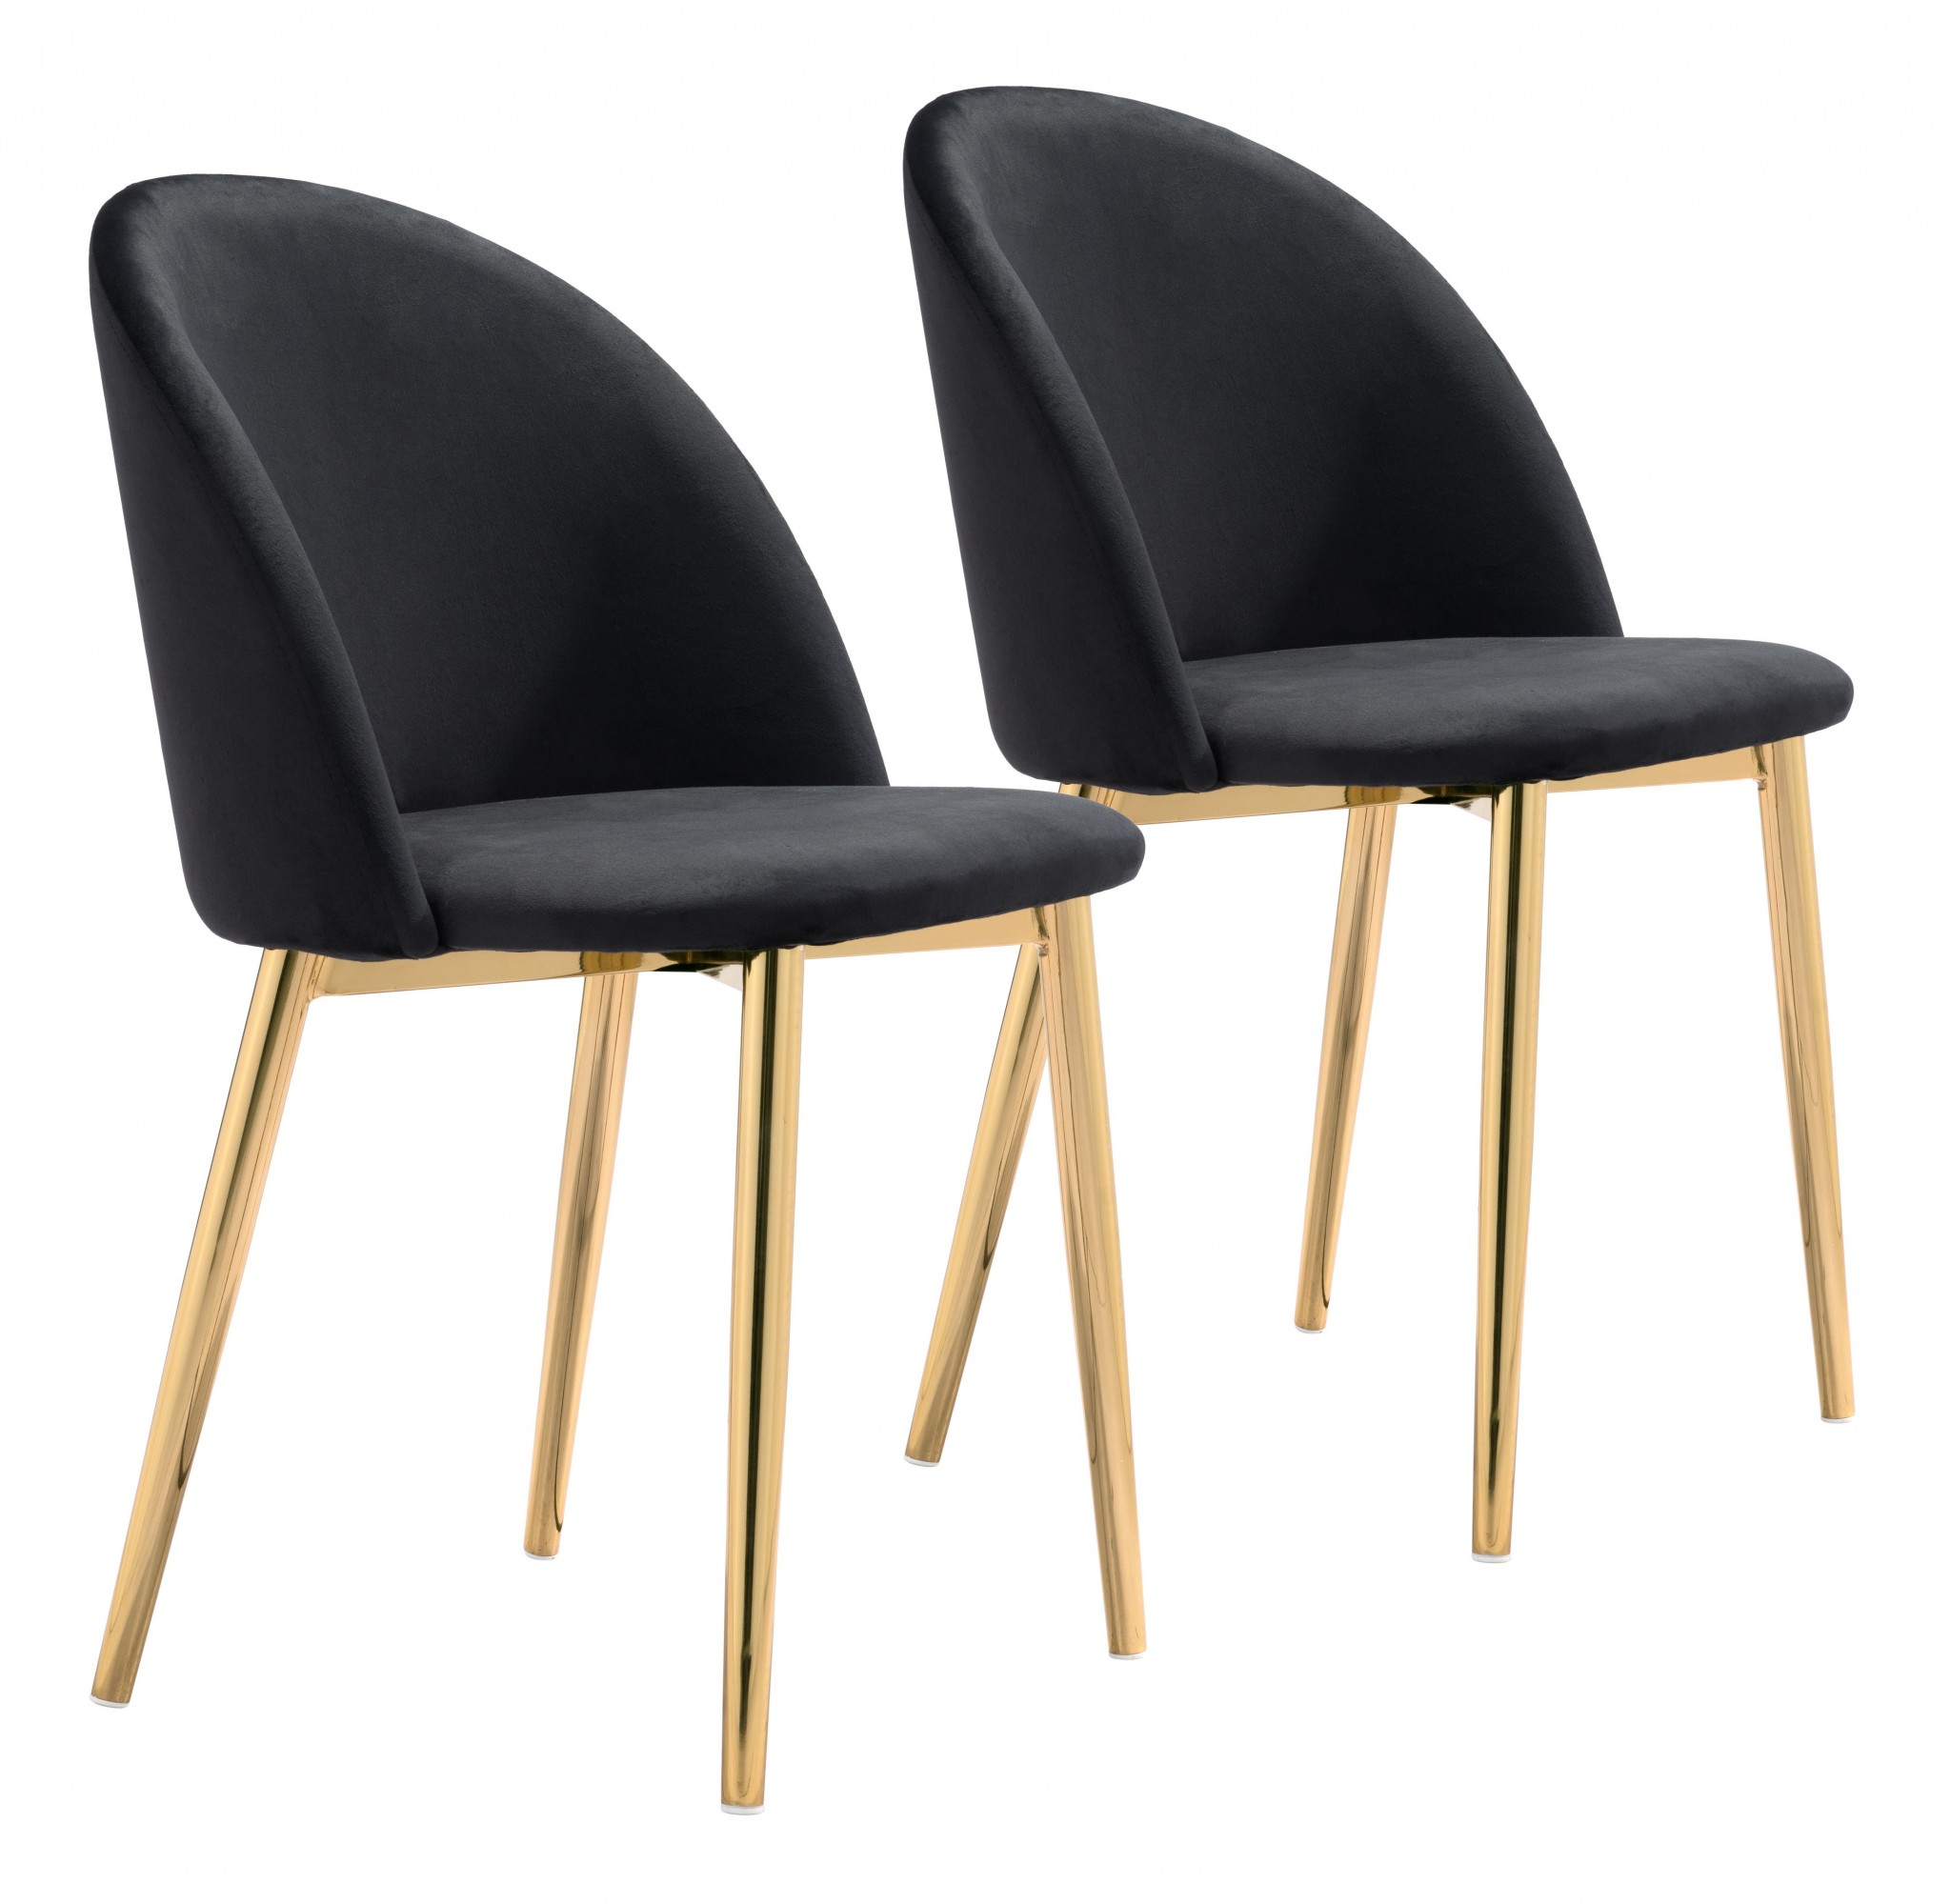 Set of Two Jet Black and Gold Modern Pringle Dining Chairs